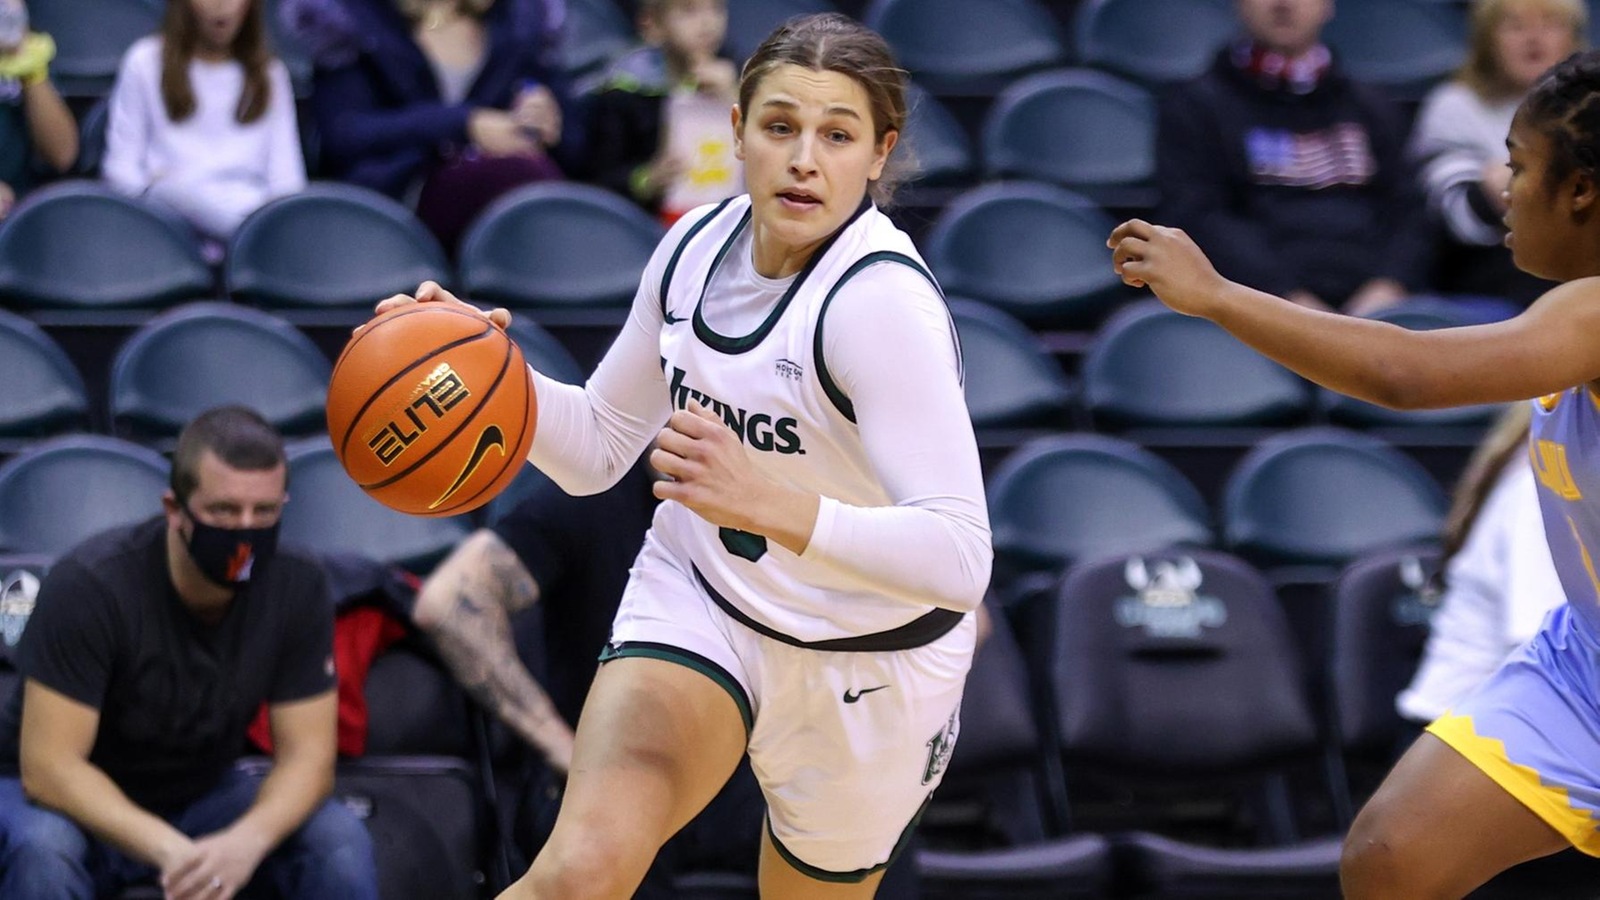 Cleveland State Women's Basketball Returns To #HLWBB Play At Robert Morris